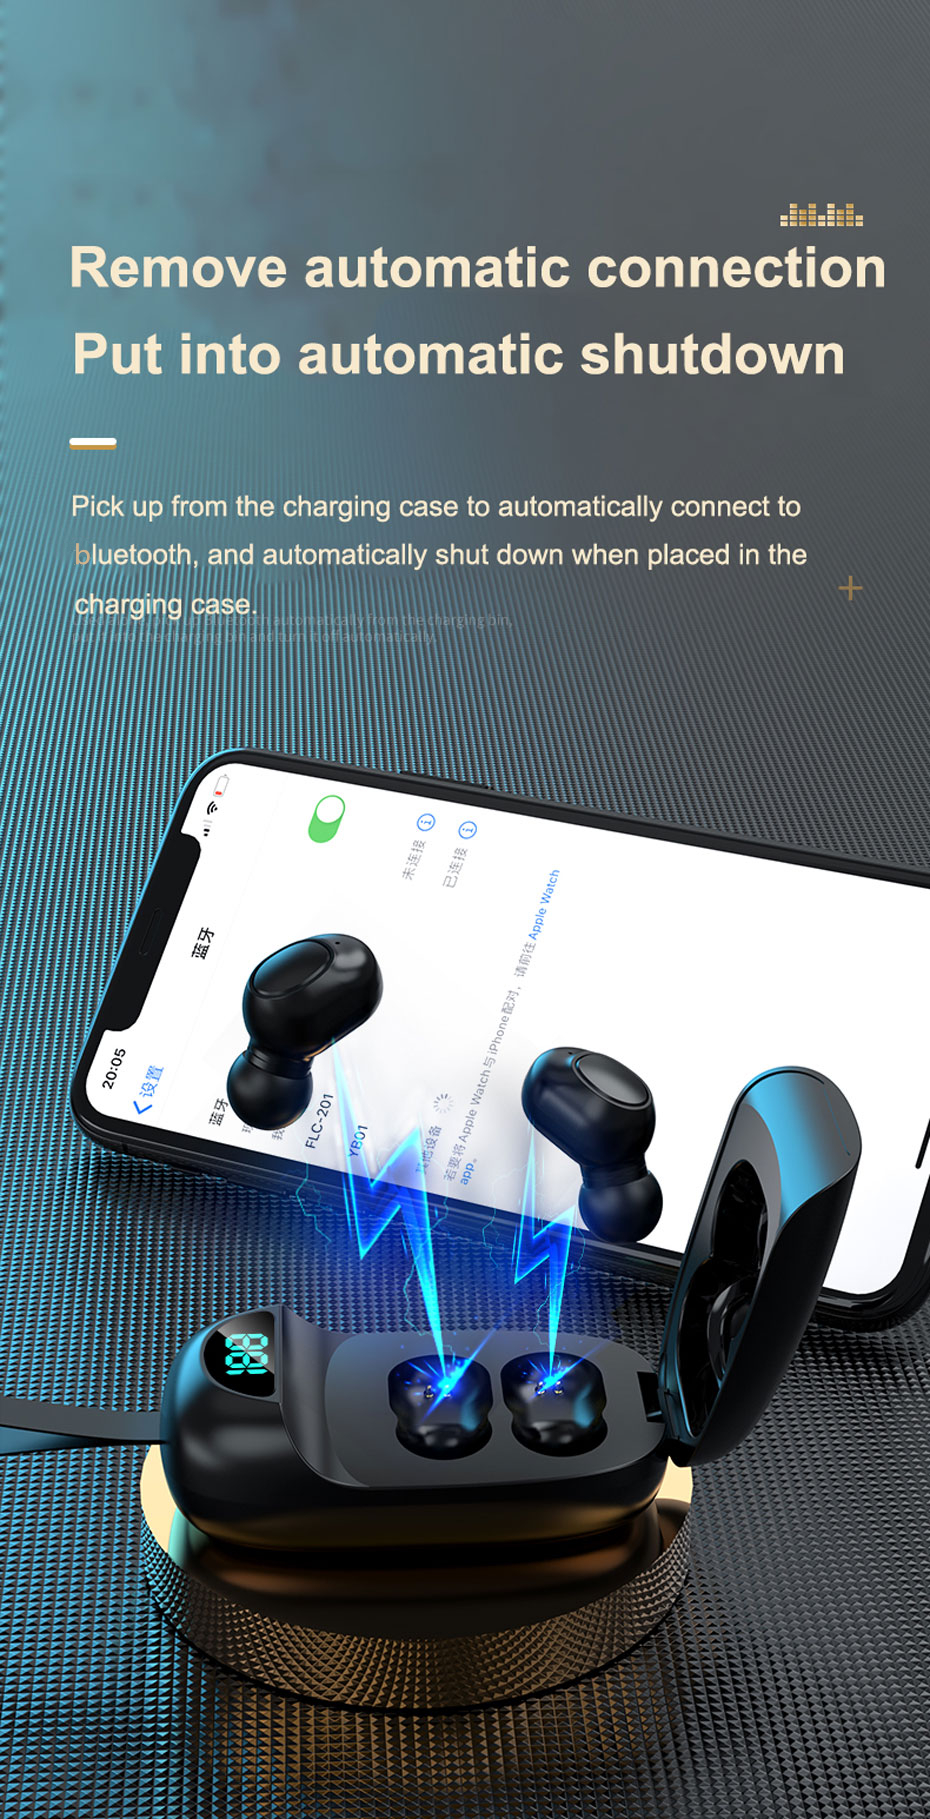 Bakeey-JS25-TWS-bluetooth-50-Wireless-Earphones-Earbuds-Stereo-In-ear-HIFI-Headsets-with-LED-Display-1818113-7